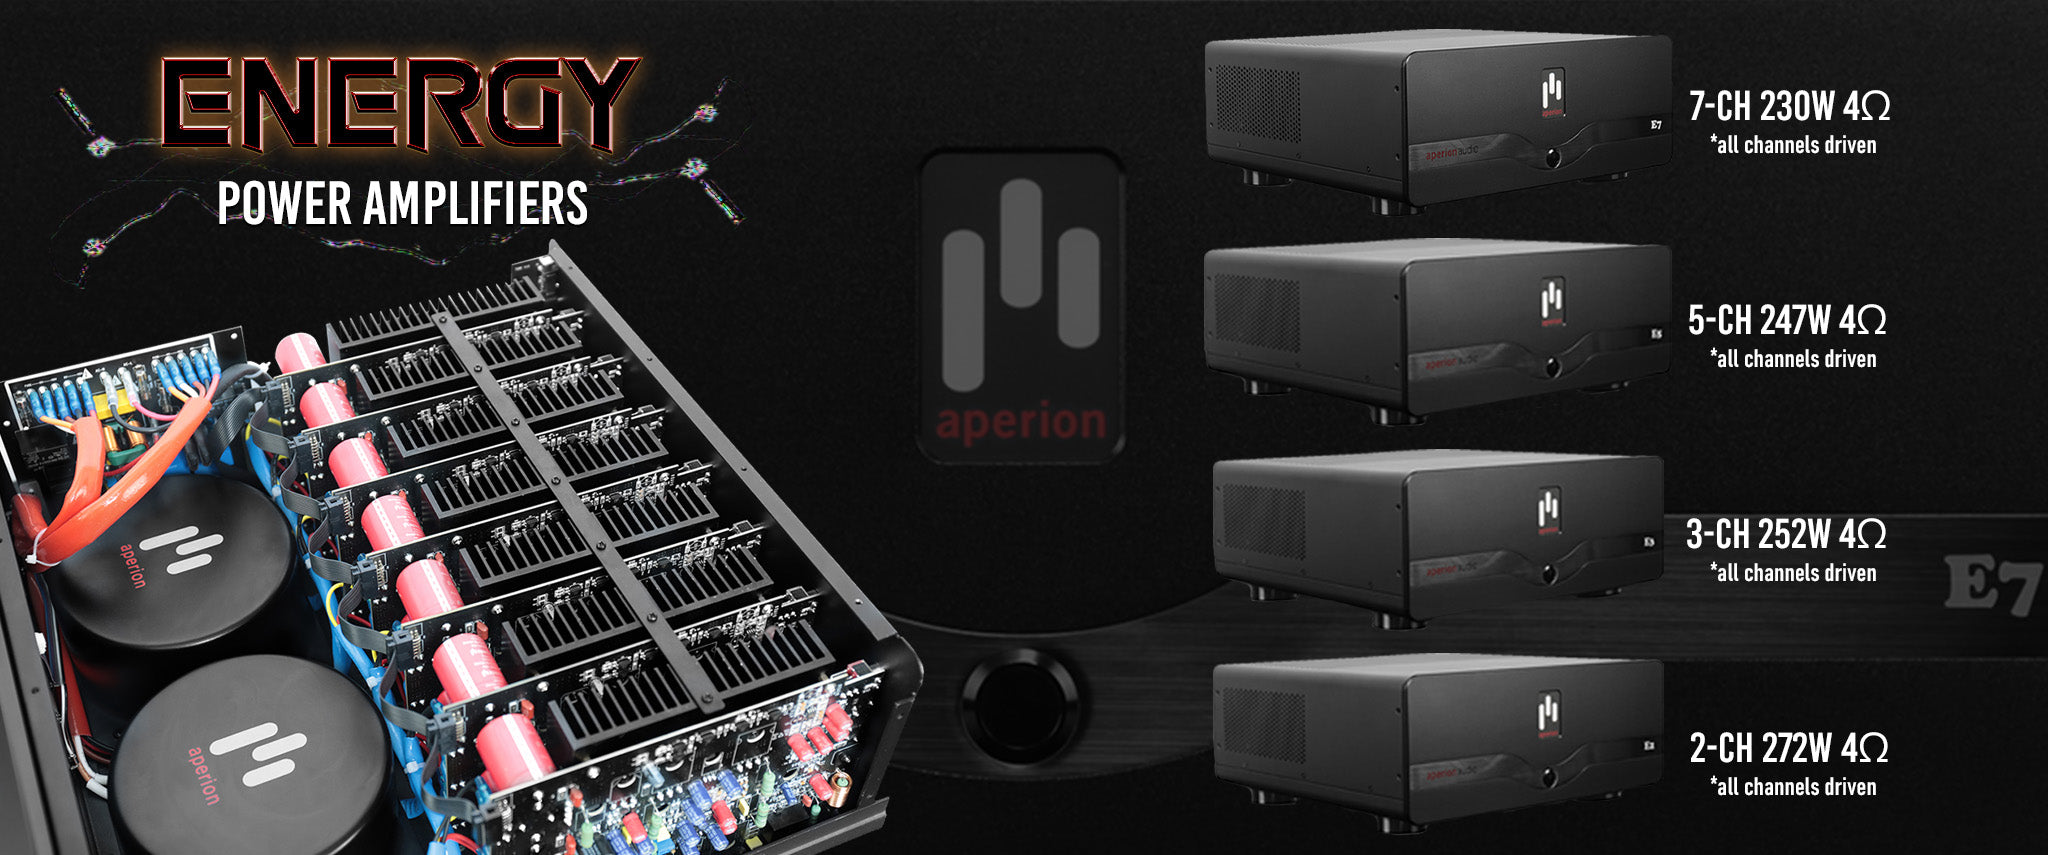 Aperion Audio Home Surround Sound Stereo Speaker System